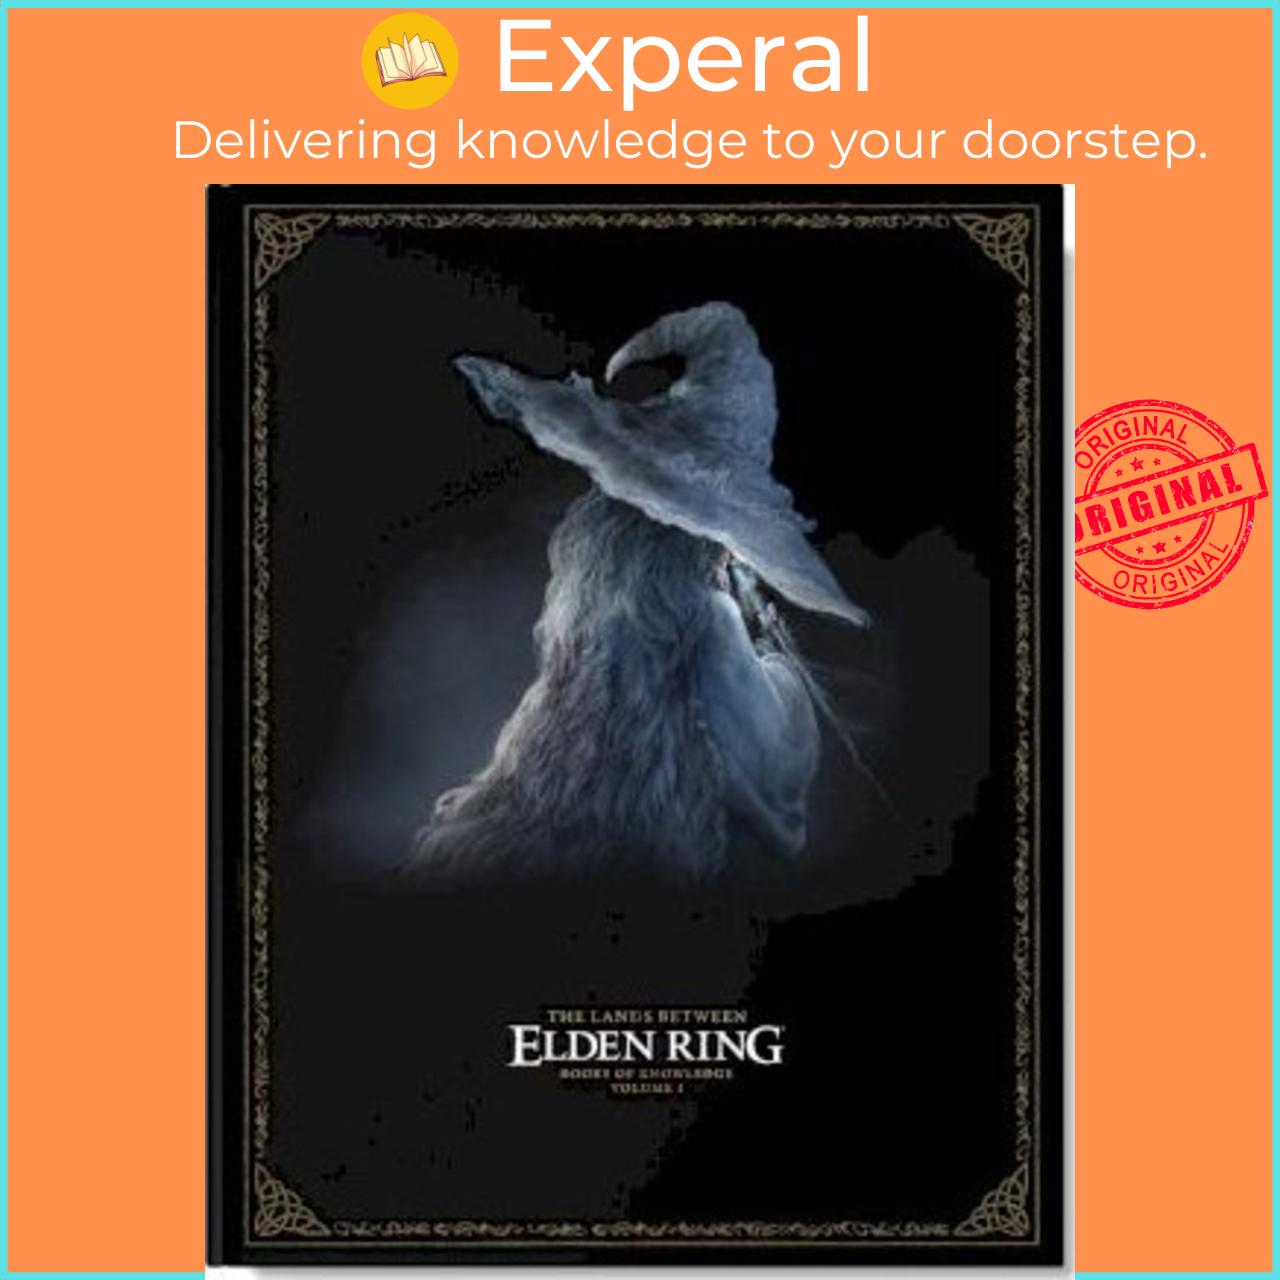 Sách - Elden Ring Official Strategy Guide, Vol. 1 : The Lands Between by Future Press (hardcover)